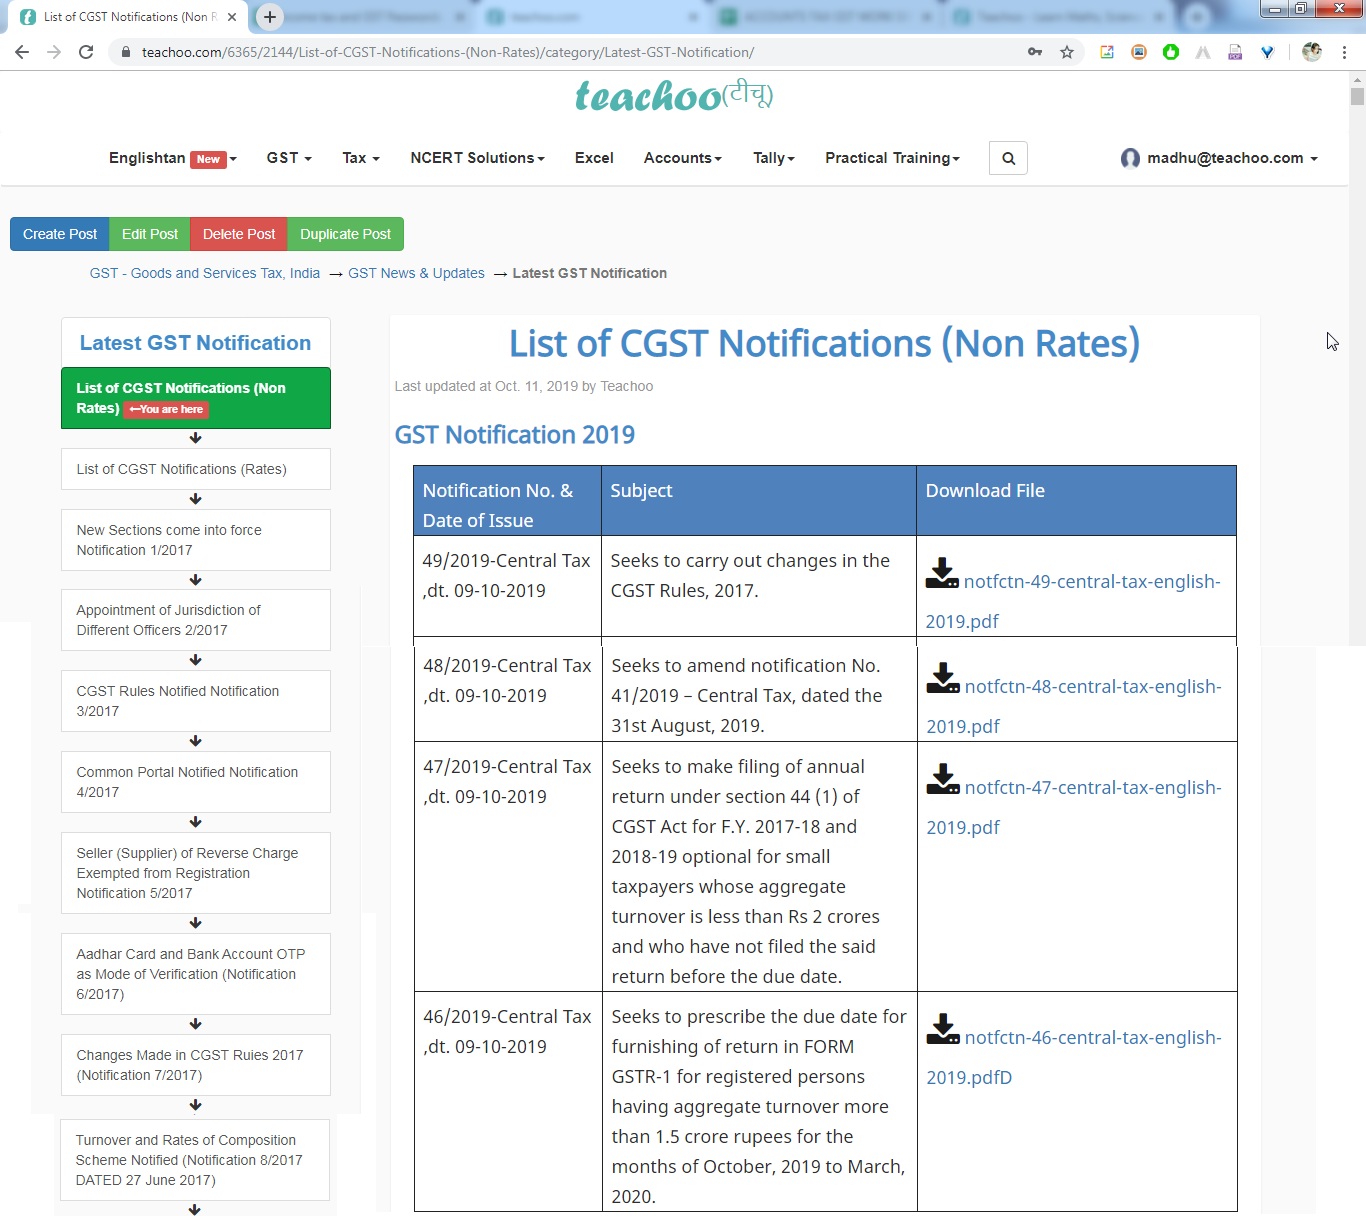 Where to check Latest changes and Notifications in GST Teachoo